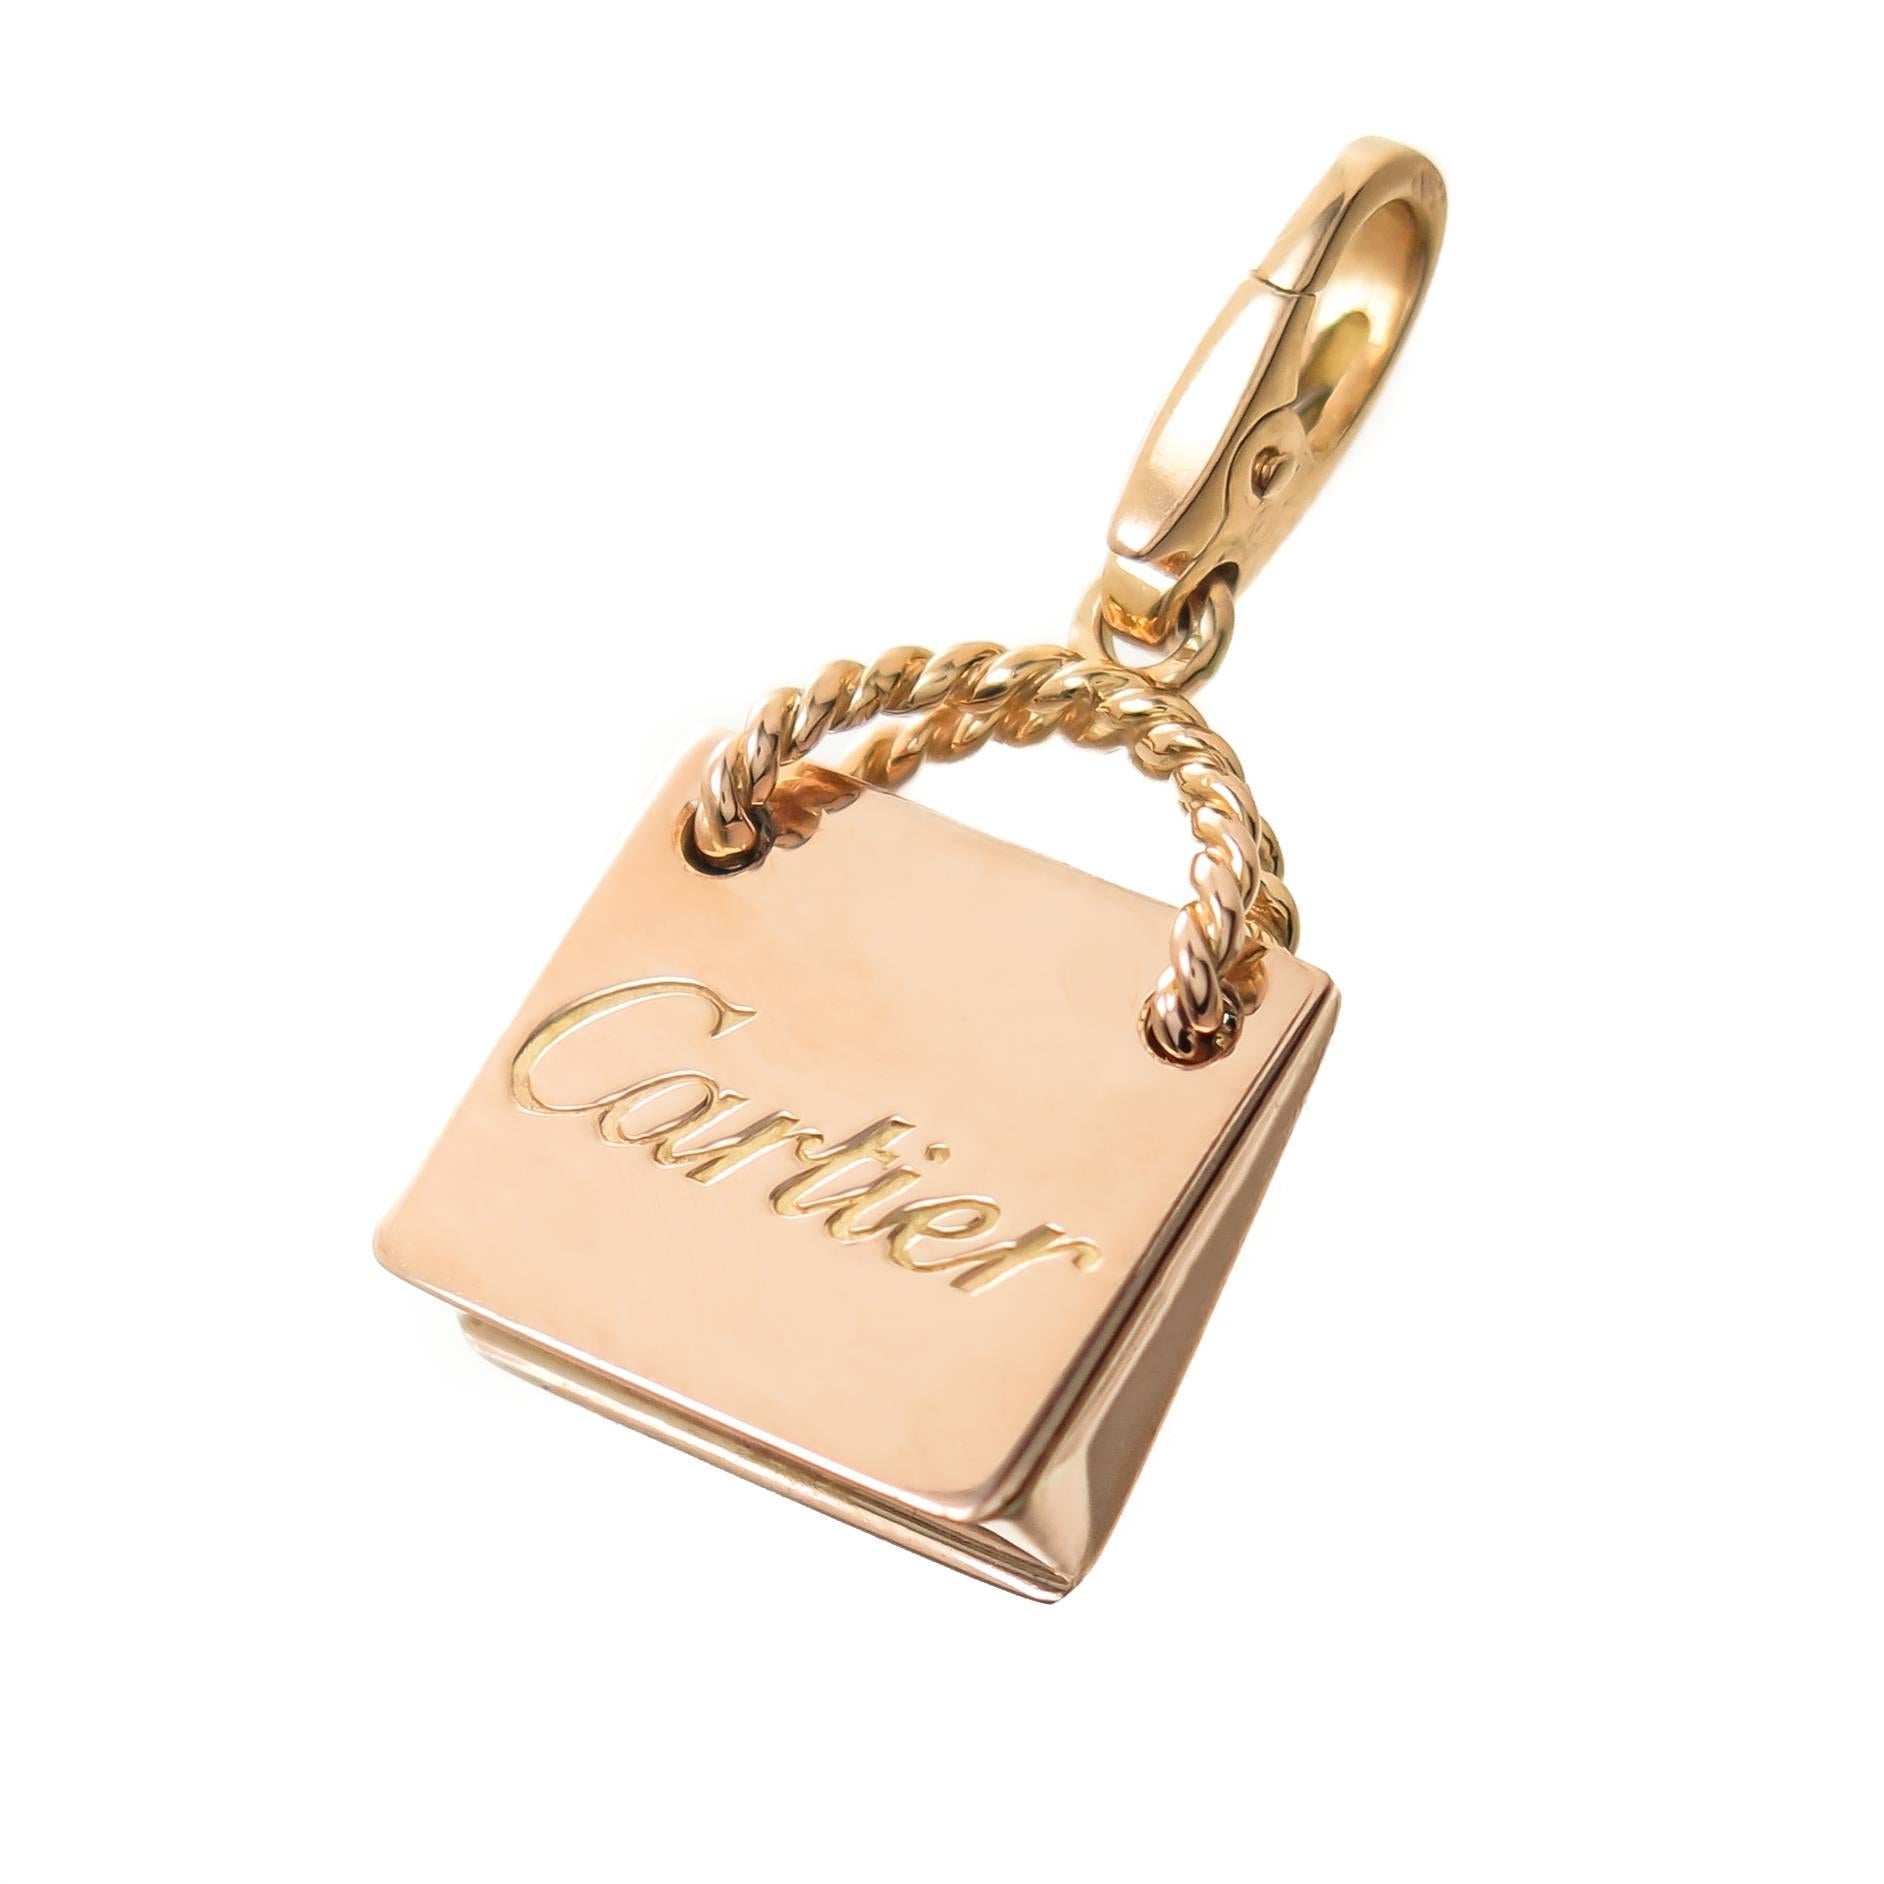 Cartier Rose Gold Shopping Bag Charm at 